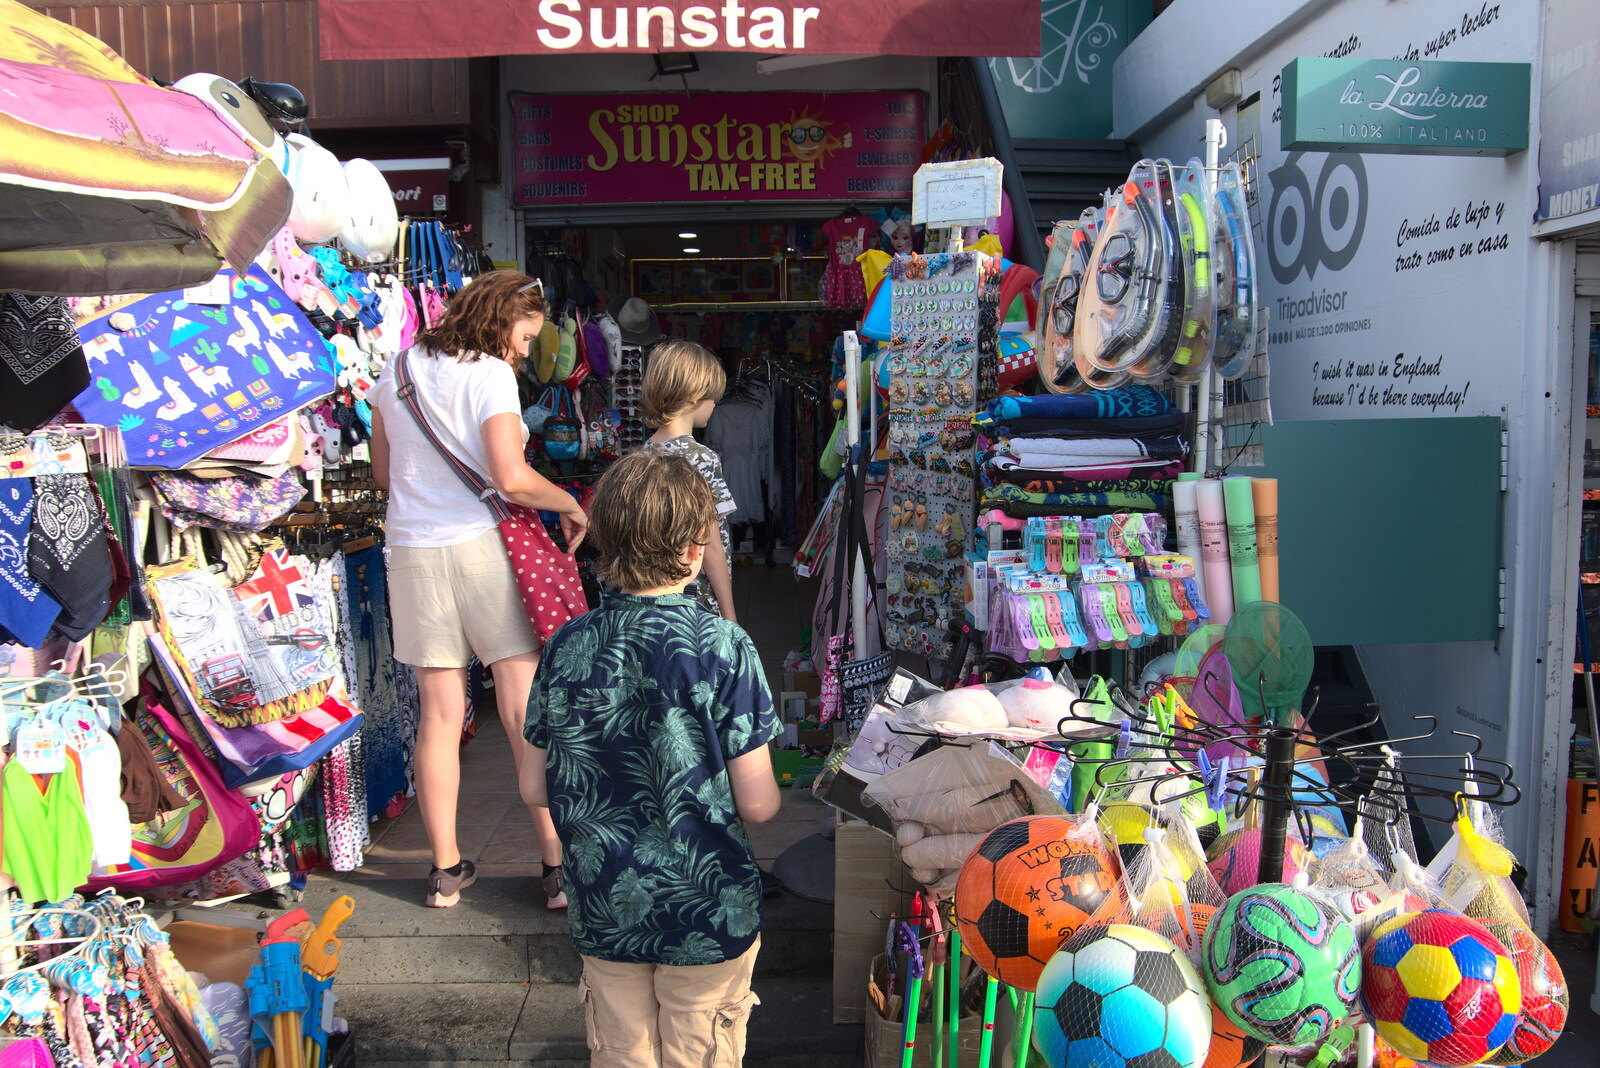 We visit a tourist tat shop from Five Days in Lanzarote, Canary Islands, Spain - 24th October 2021